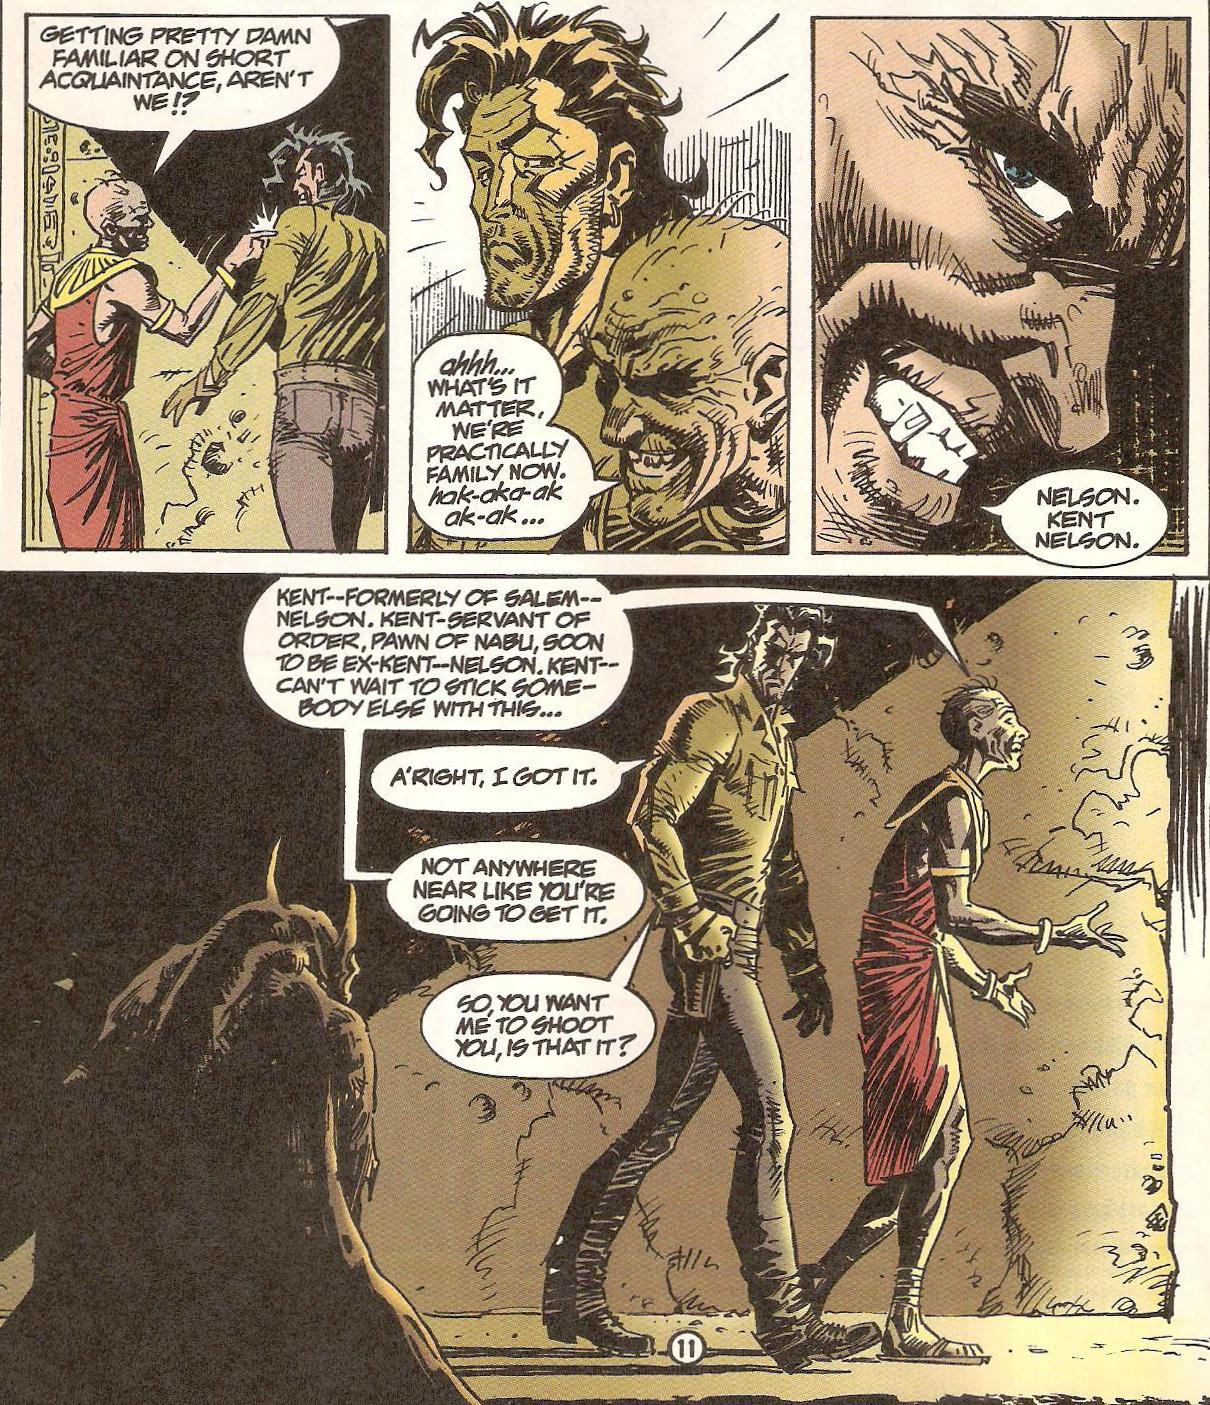 From The Book of Fate #1 (1997)